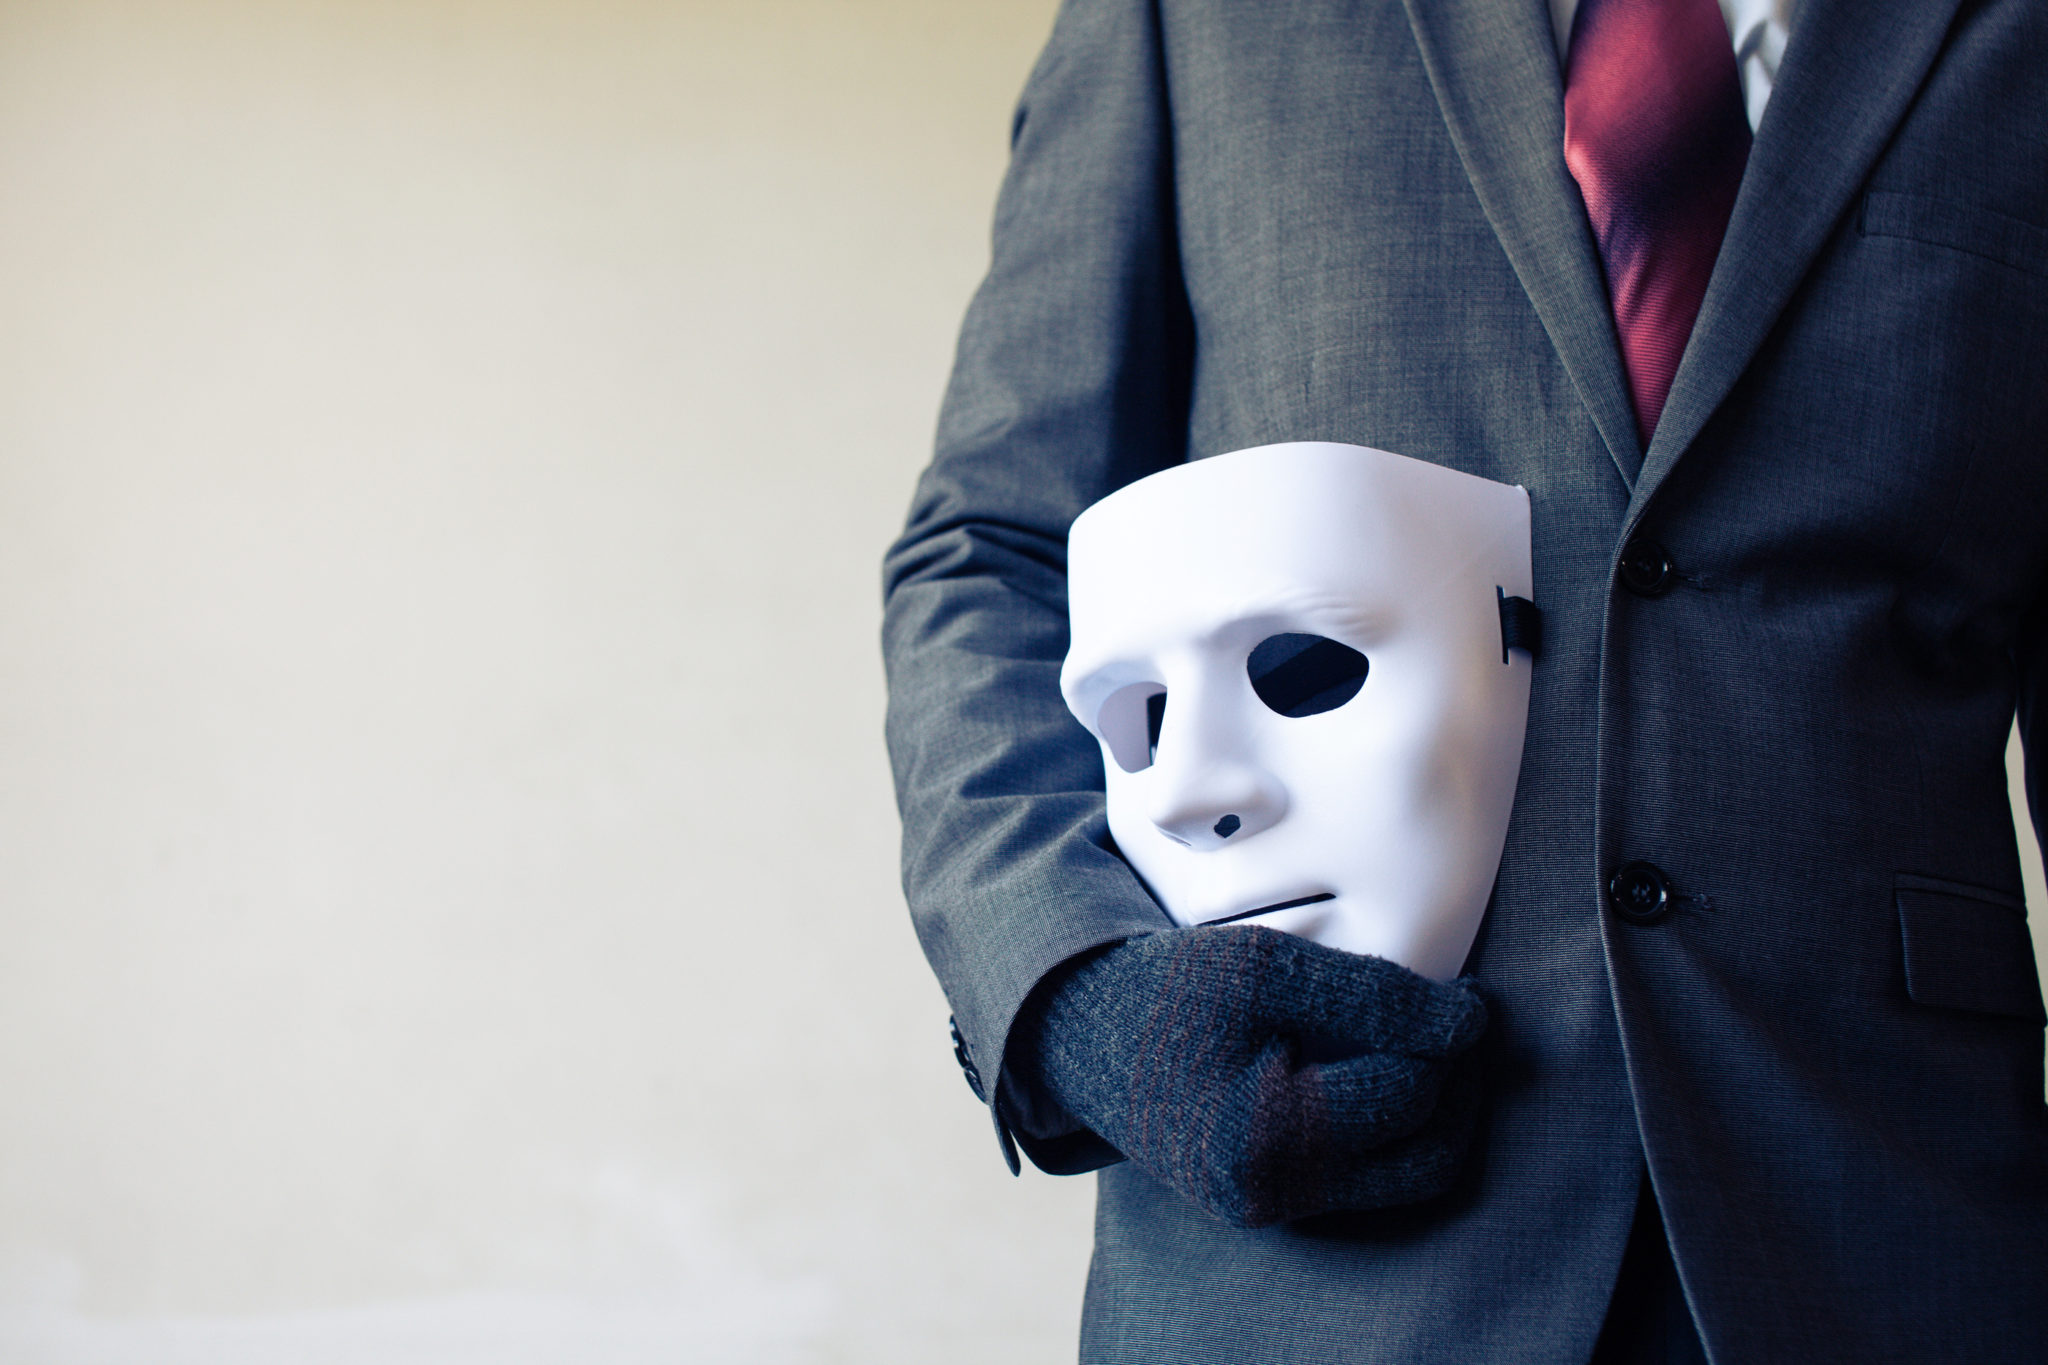 Man holding mask in business suit to defraud businesses